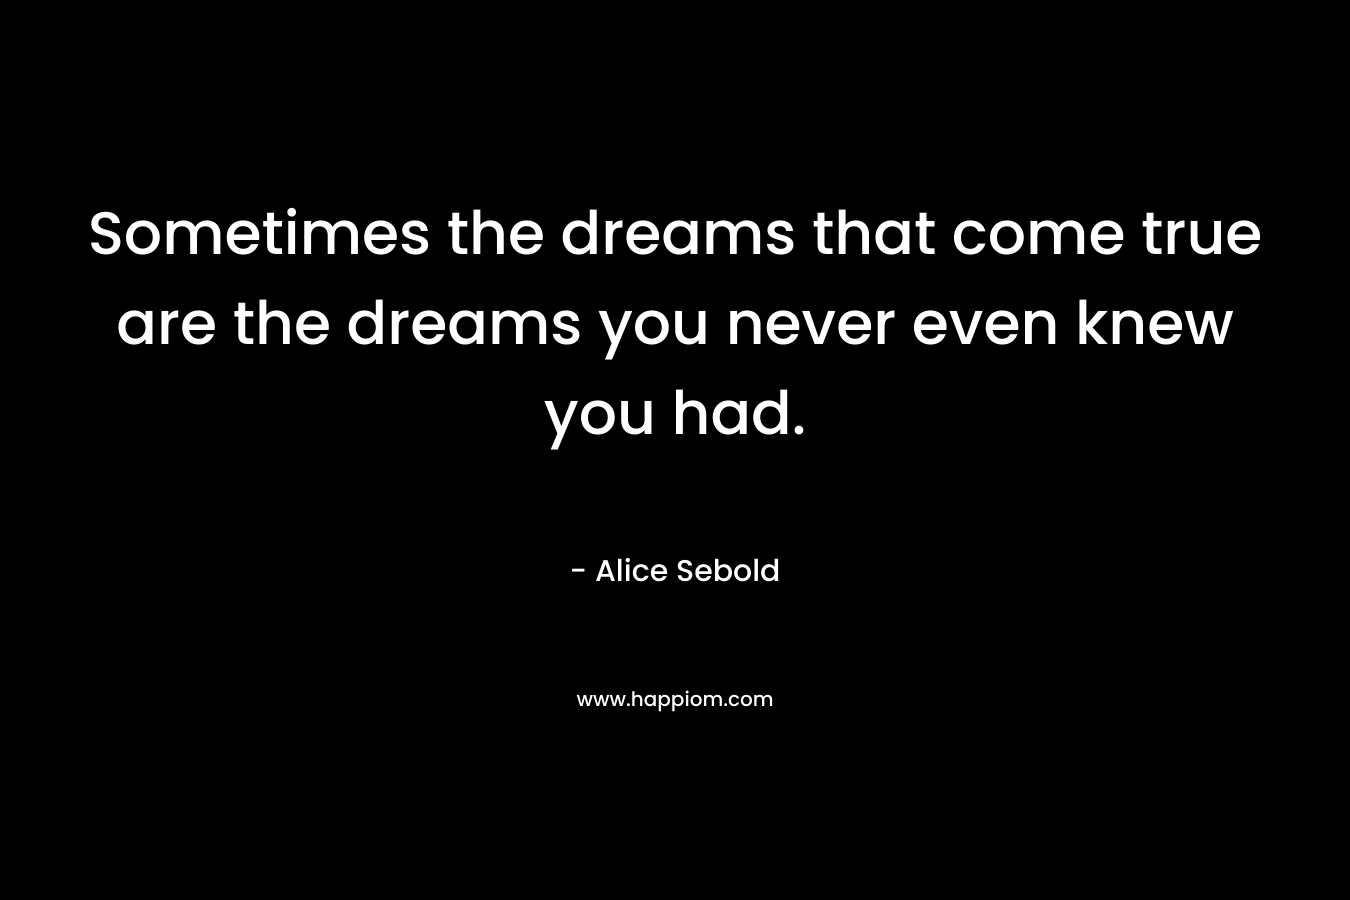 Sometimes the dreams that come true are the dreams you never even knew you had.